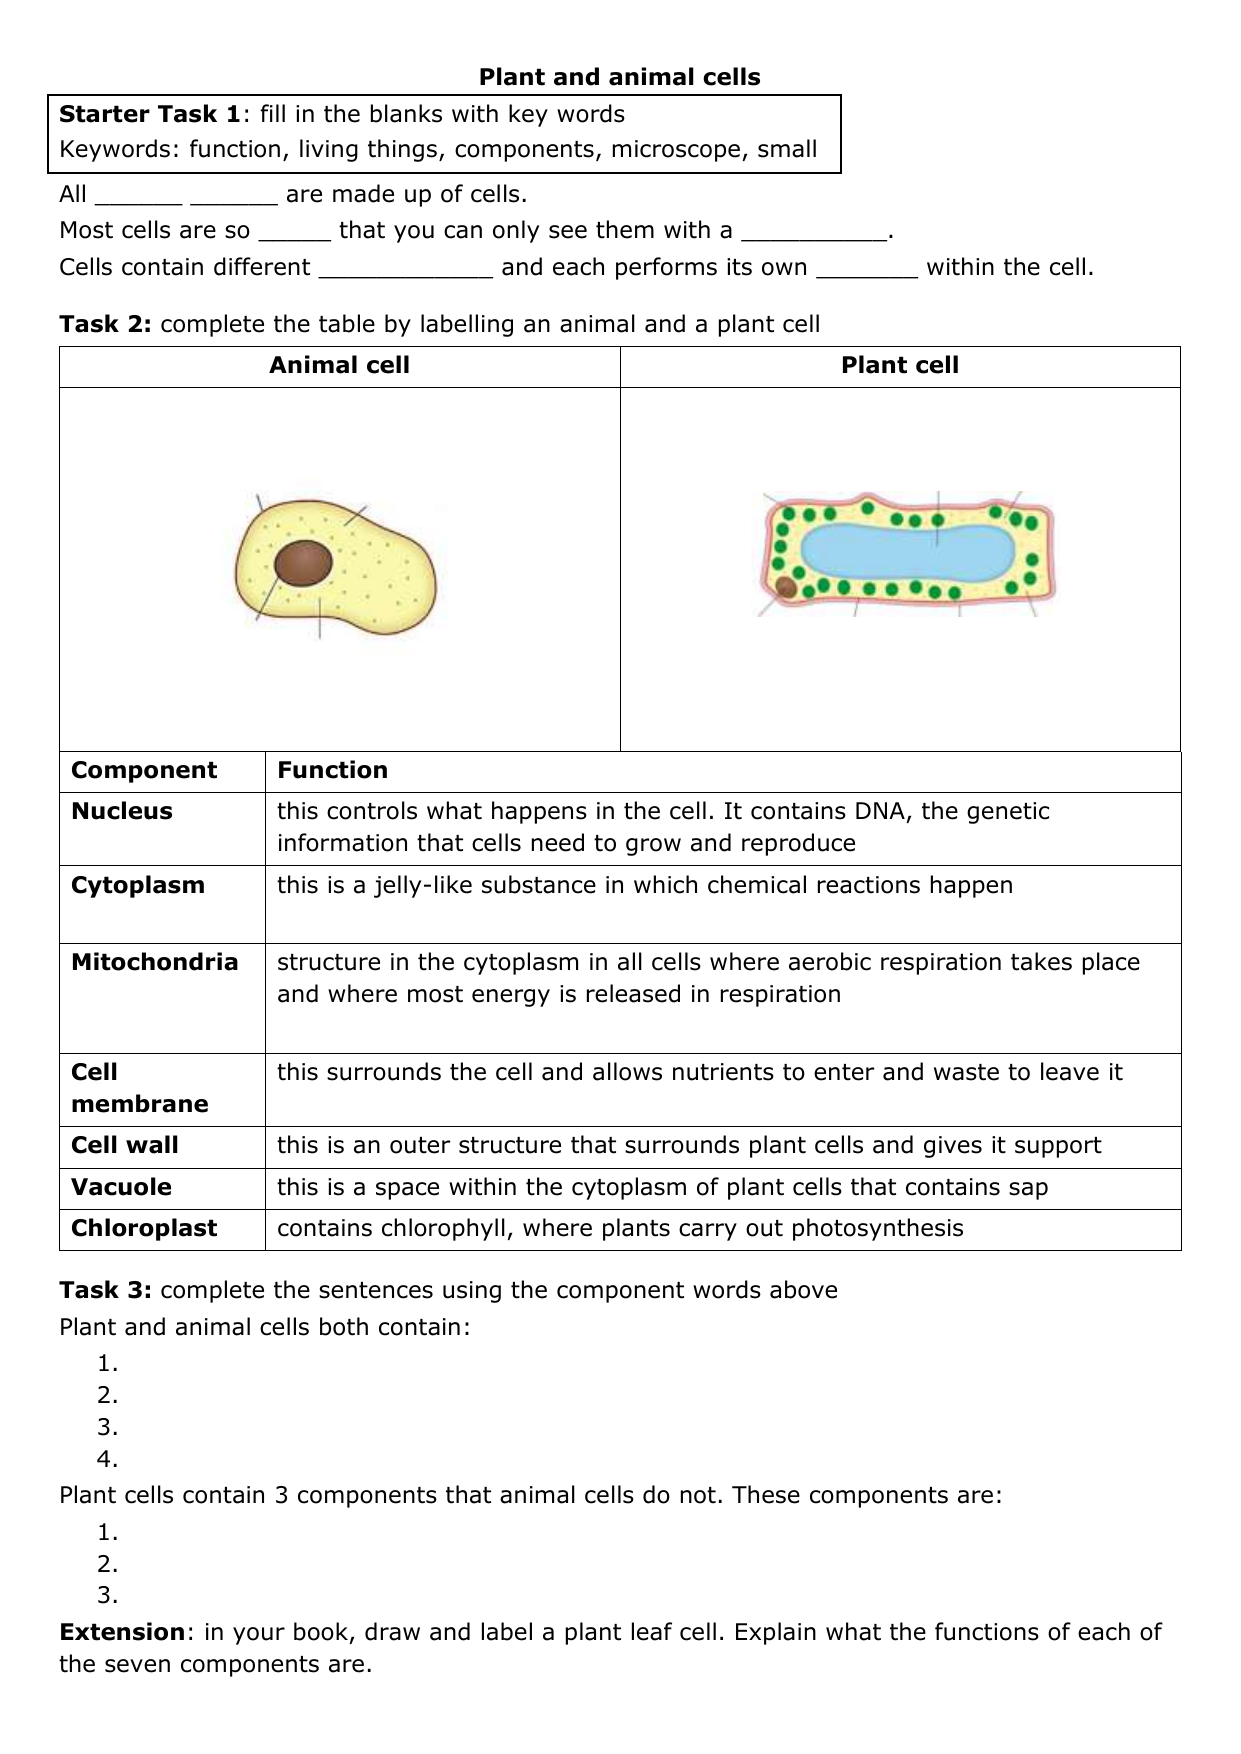 Plant-and-animal-cells-task DOCX